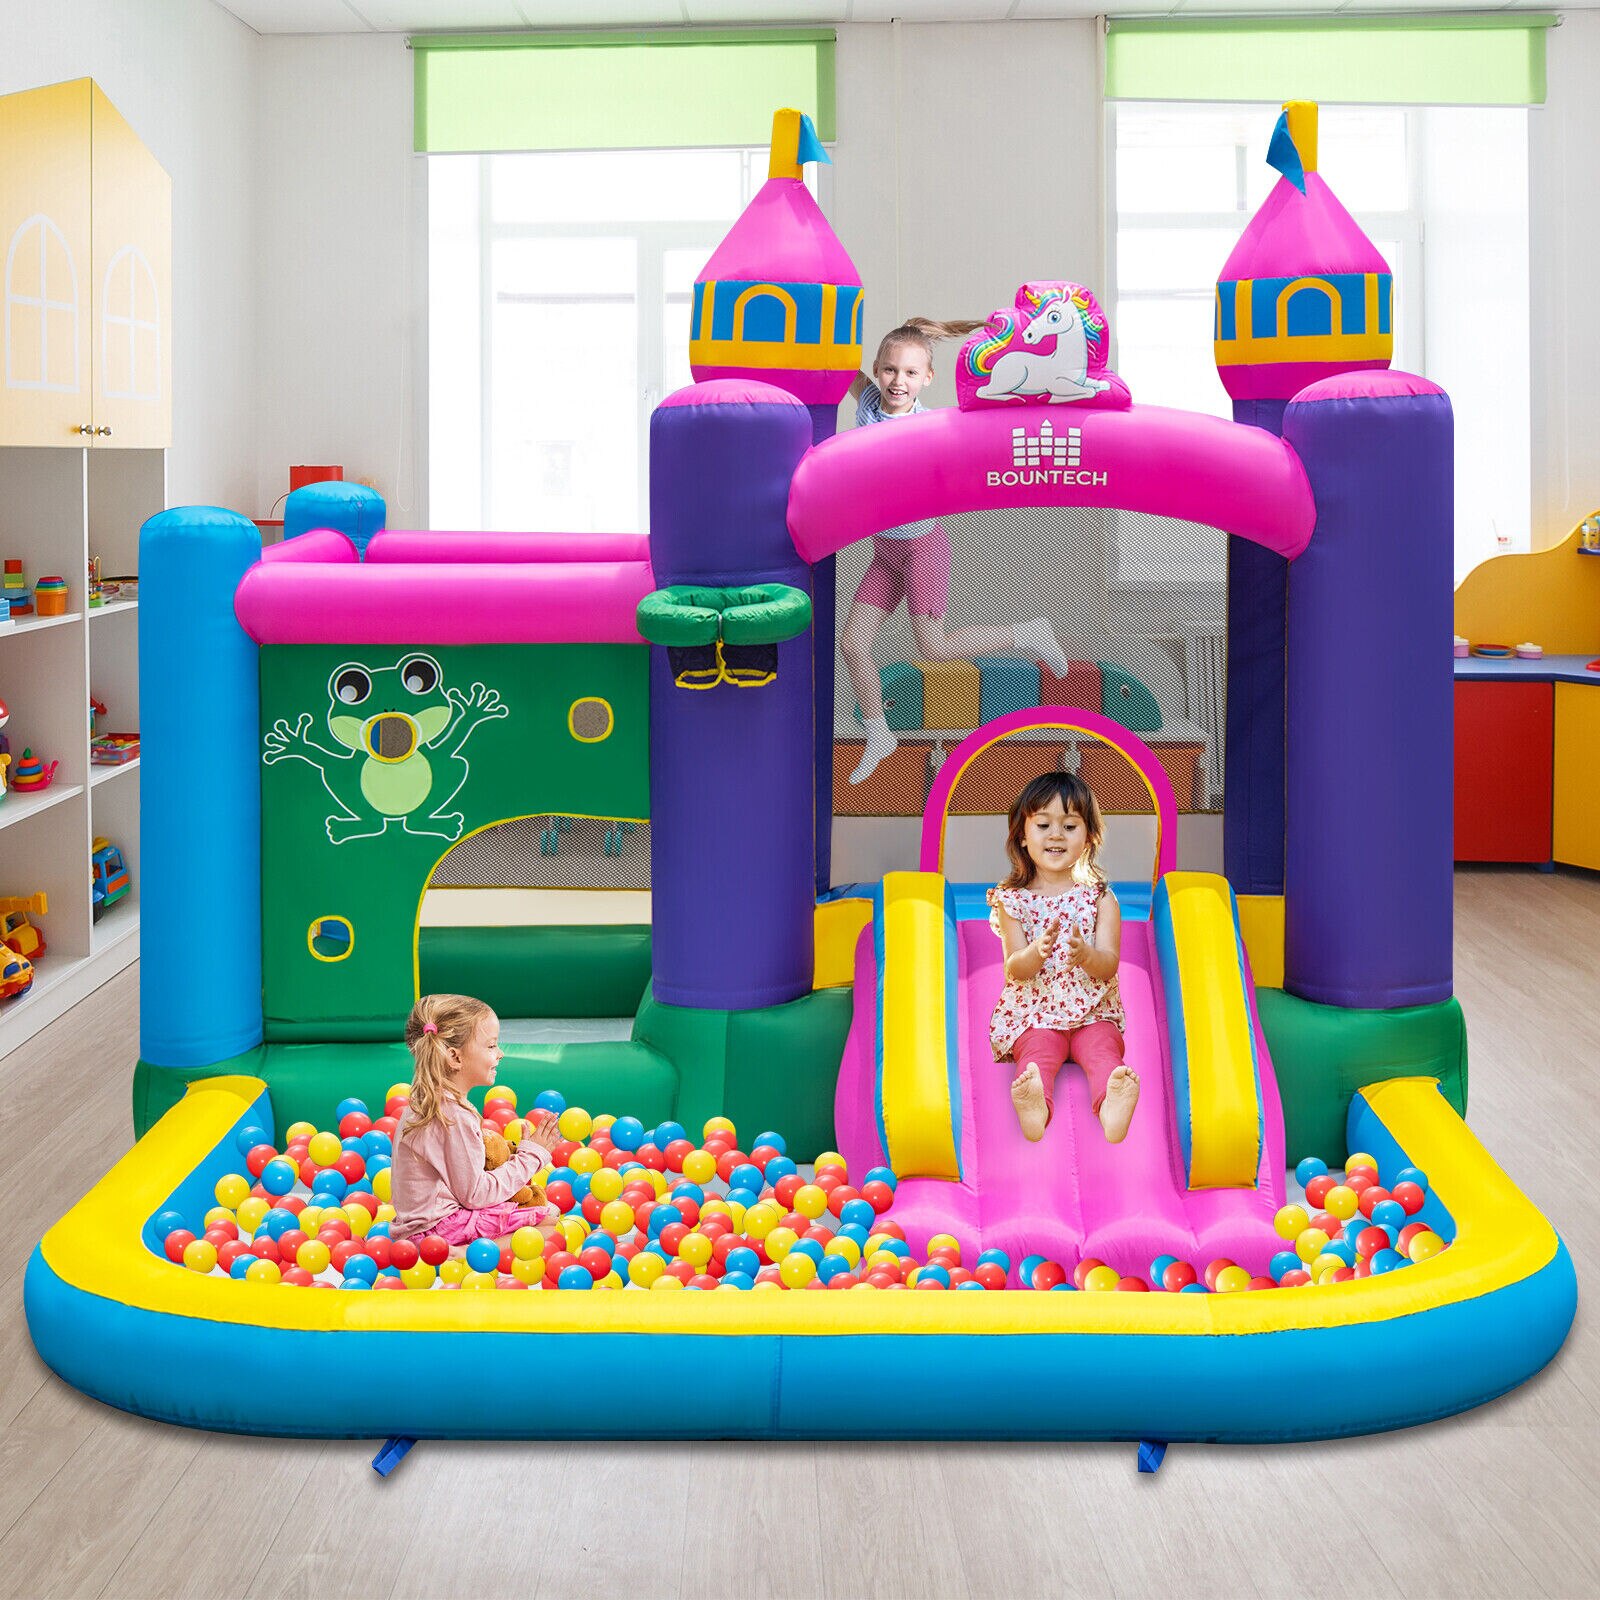 Babyjoy-Inflatable-Unicorn-themed-Bounce-House-6-in-1-Kids-Bounce-Castle-W-735W-Blower-4